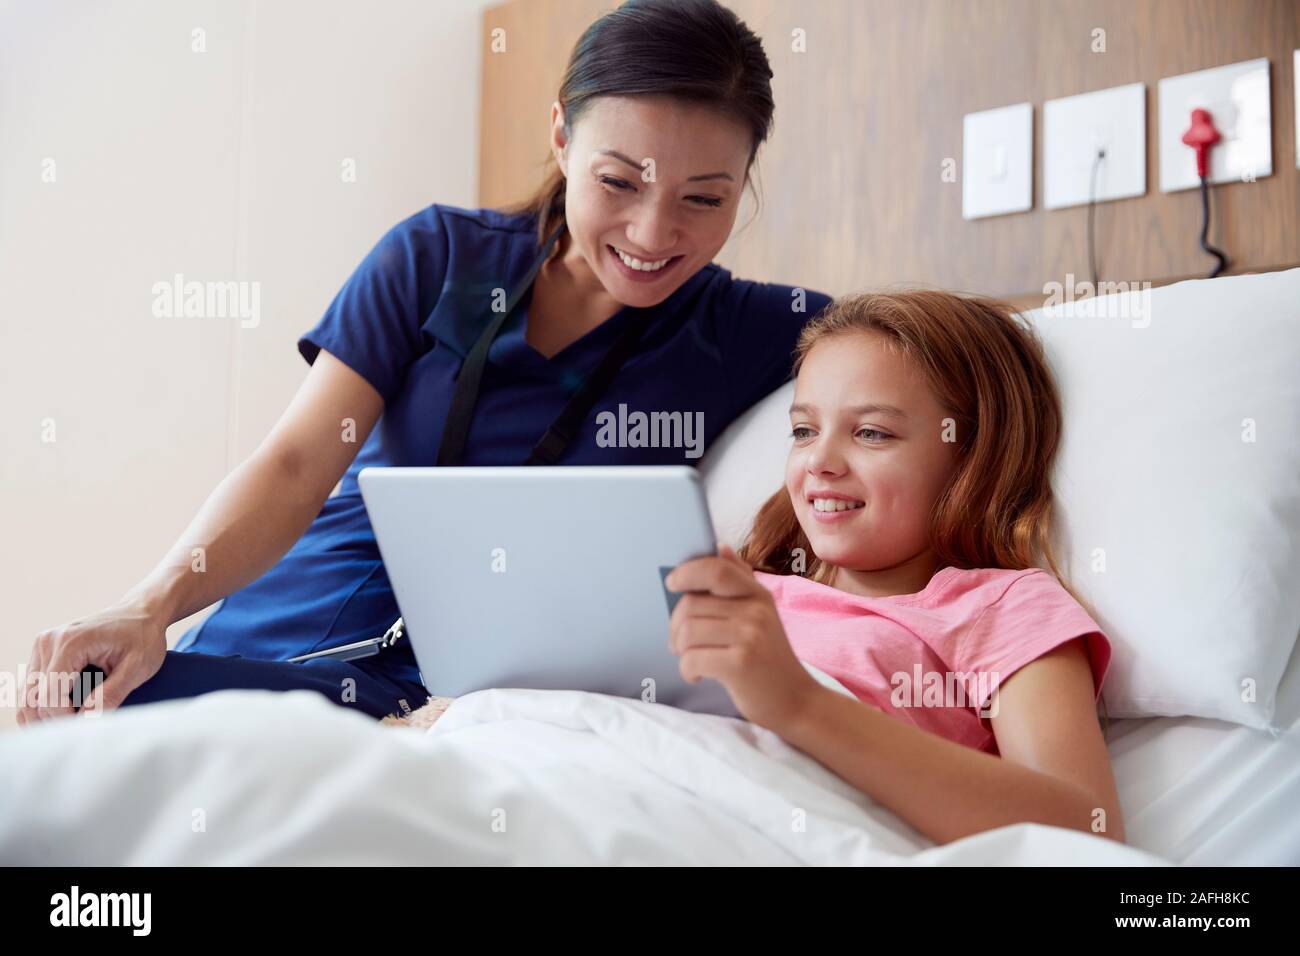 Female Nurse With Girl Lying In Hospital Bed Looking At Digital Tablet Together Stock Photo